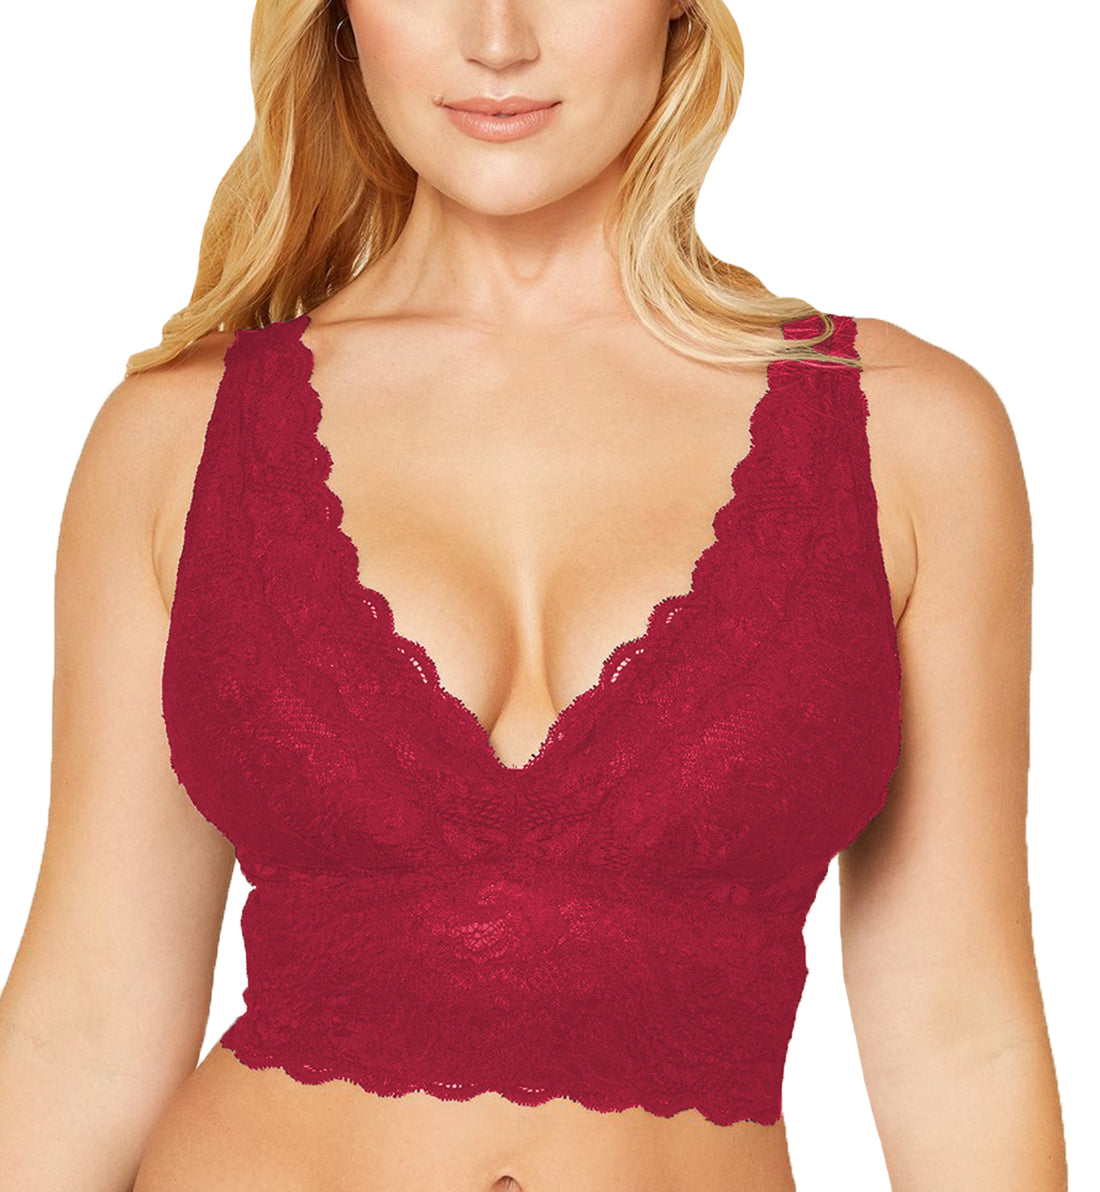 Cosabella Never Say Never CURVY Plungie Longline Bralette (NEVER1385),XS,Deep Ruby - Deep Ruby,XS